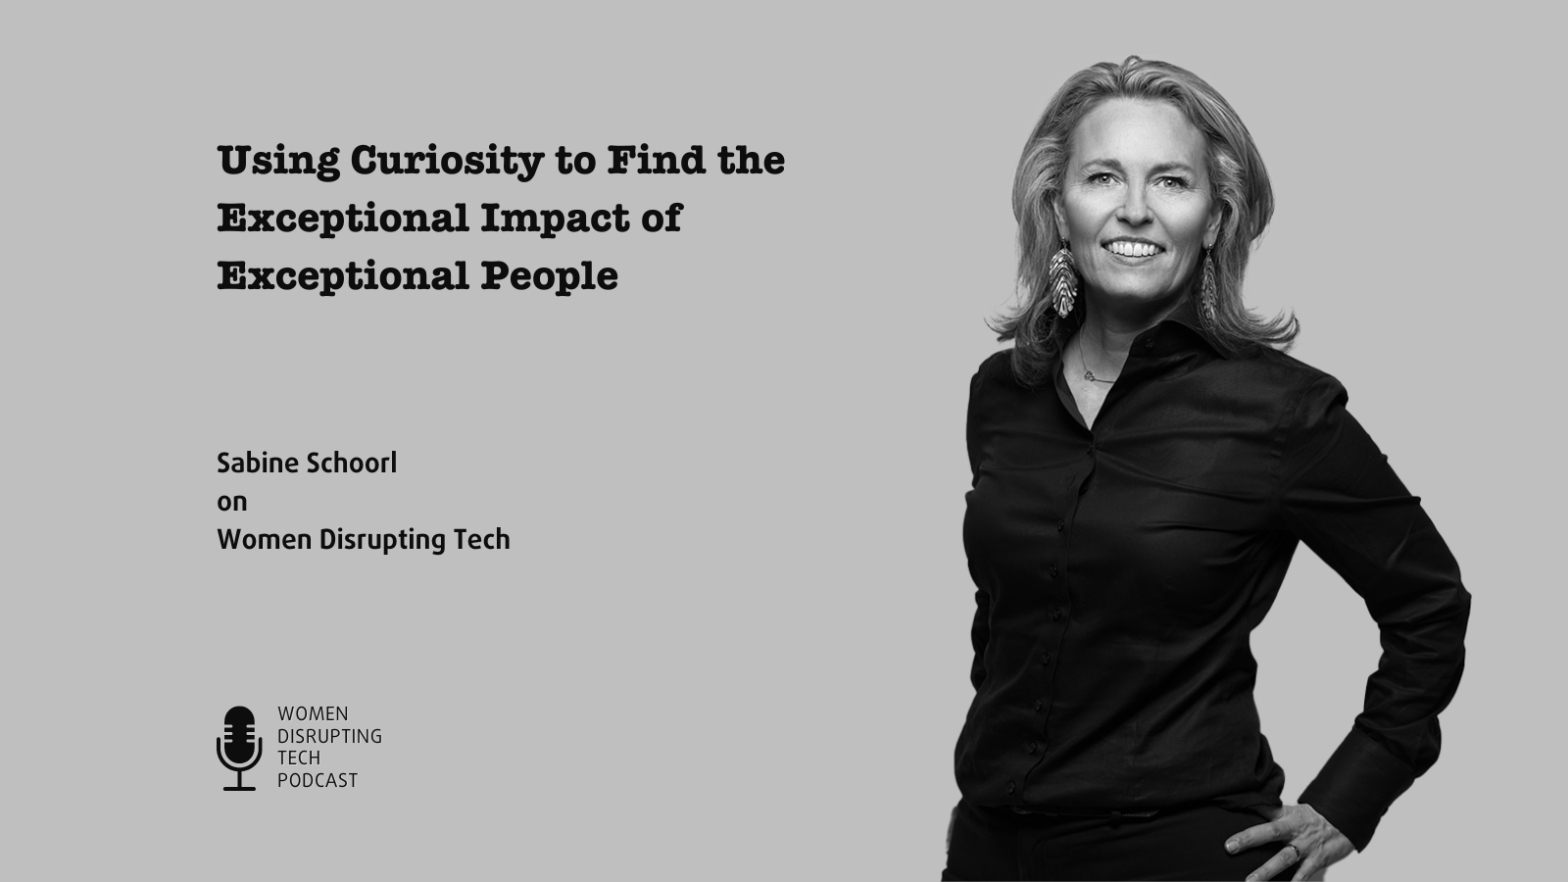 Picture of Sabine Schoorl, who is a guest on episode 41 of Women Disrupting Tech titled 'Using Curiosity to Find the Exceptional Impact of Exceptional People. You can find the podcast on Spotify, Apple, and Goodpods or by searching for "Women Disrupting Tech" on your favorite podcast app.